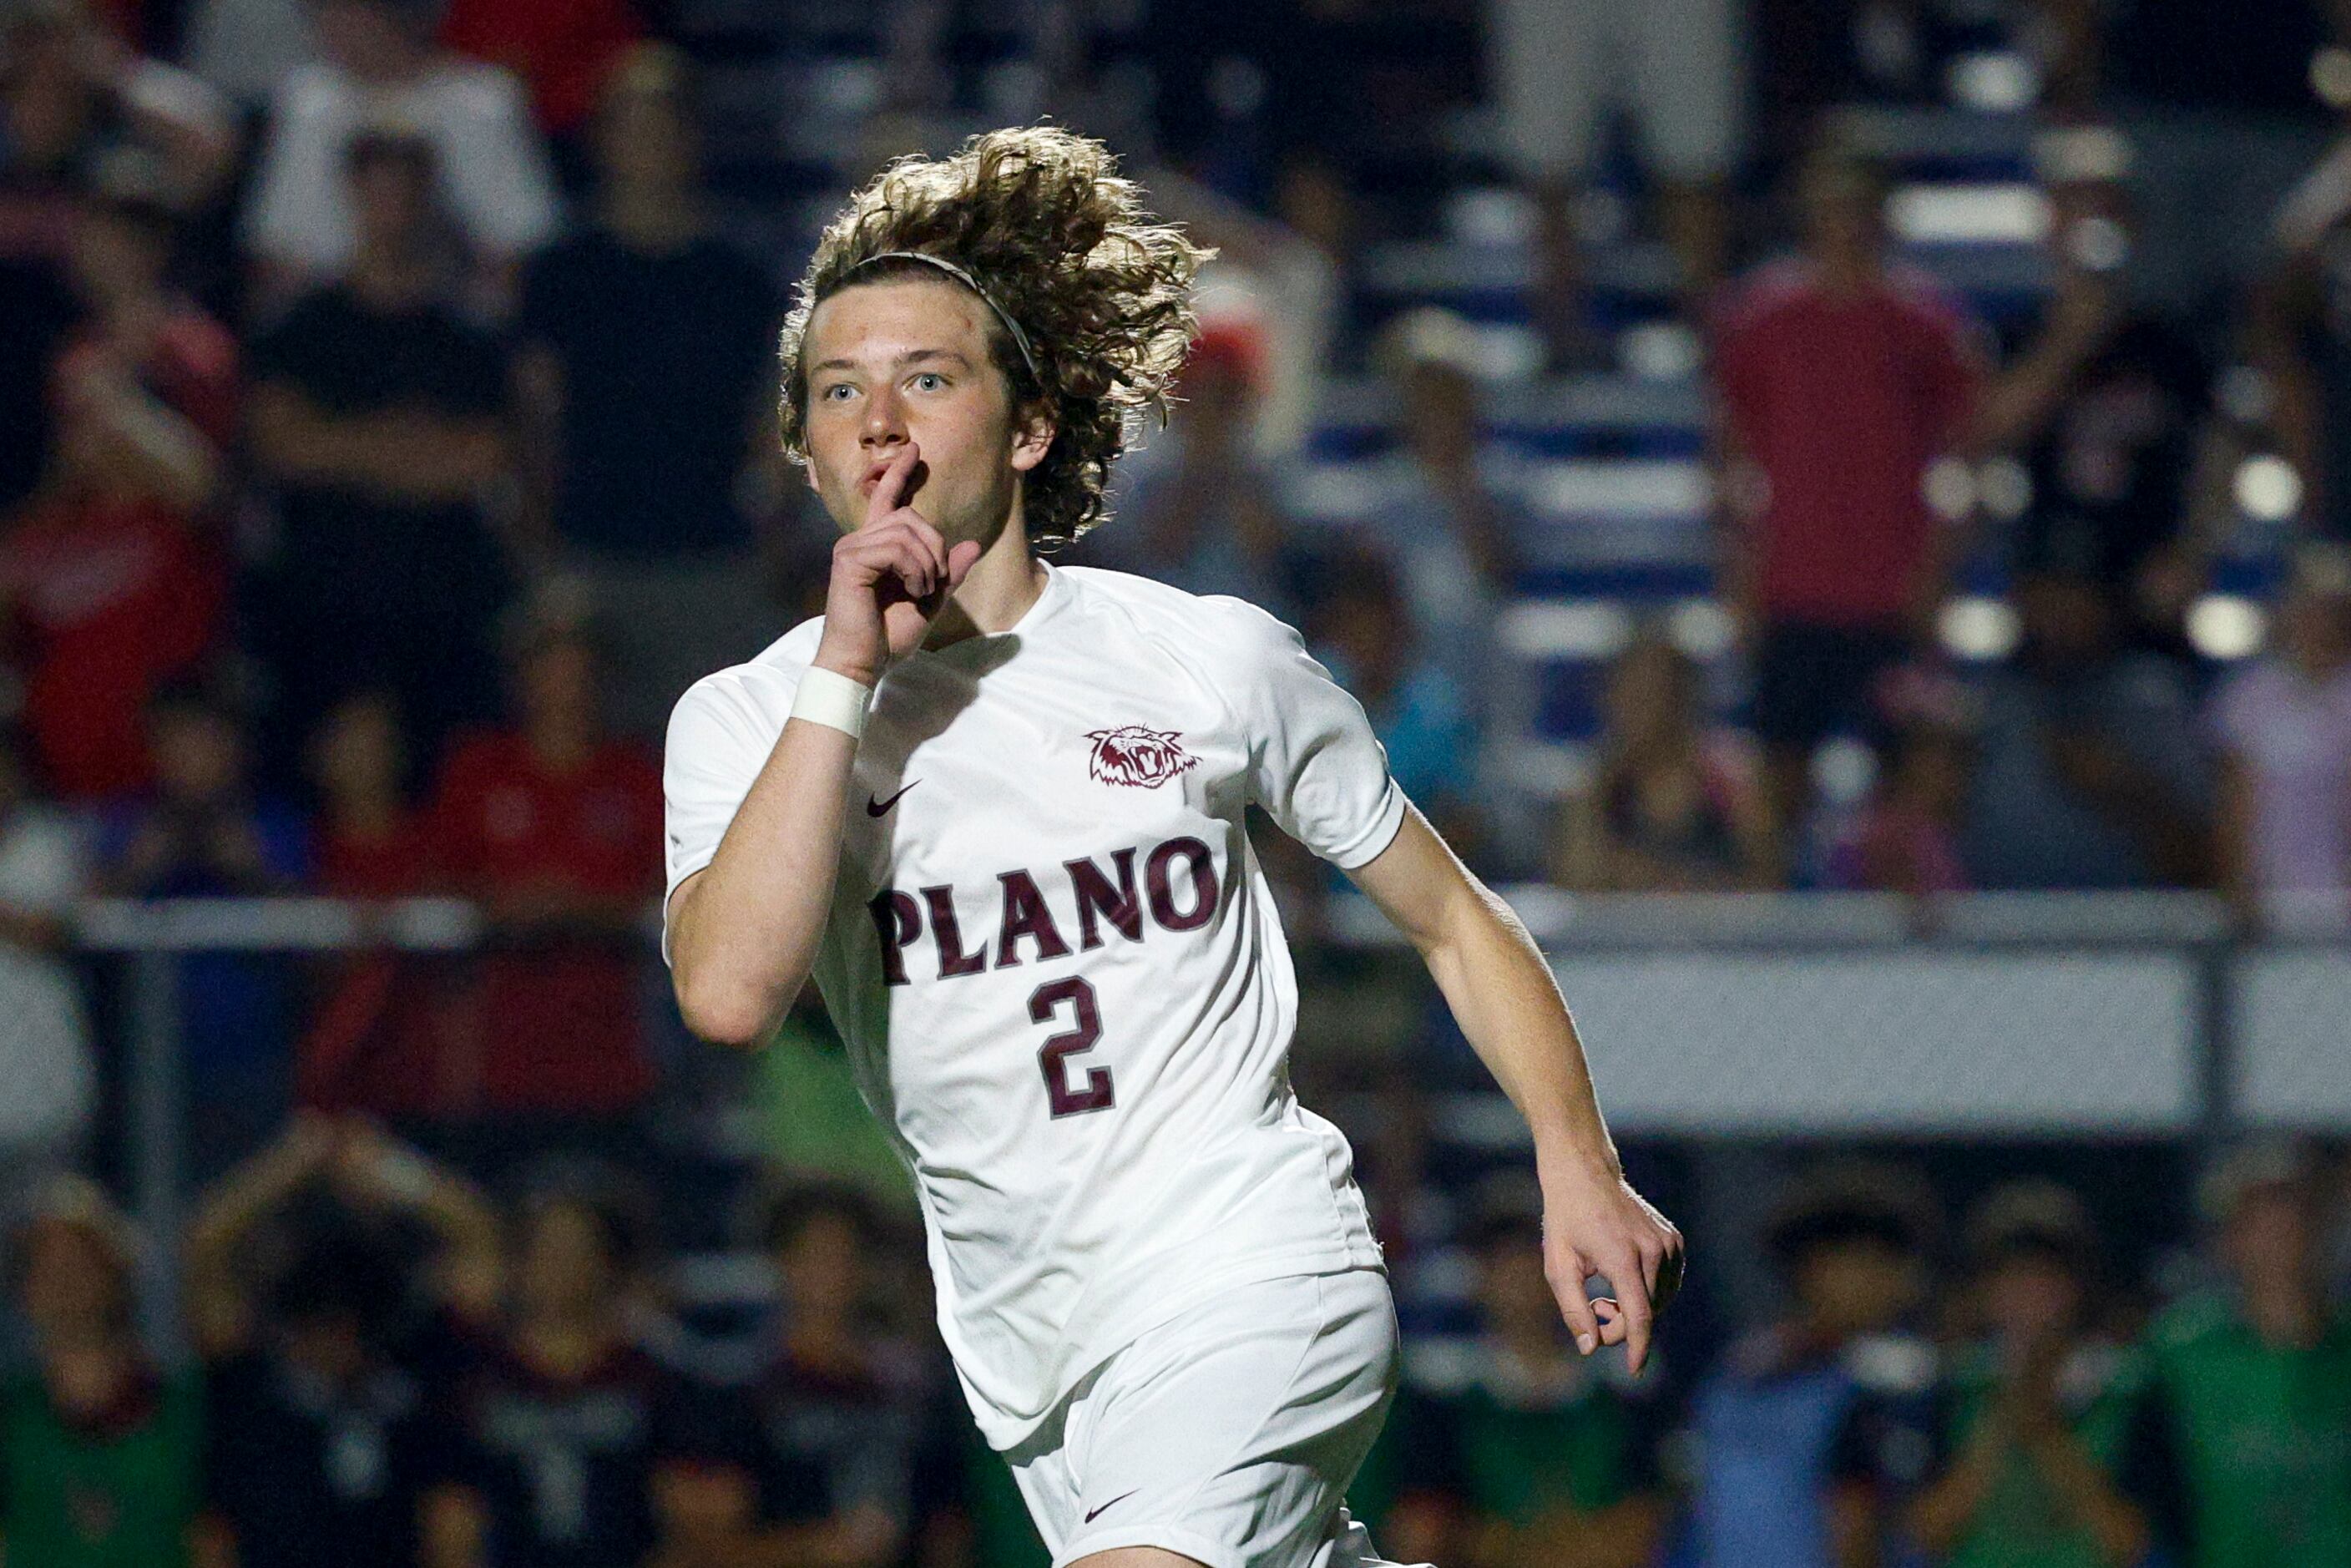 Plano defender Dayton Ralph (2) motions after scoring on a penalty kick during shootout in...